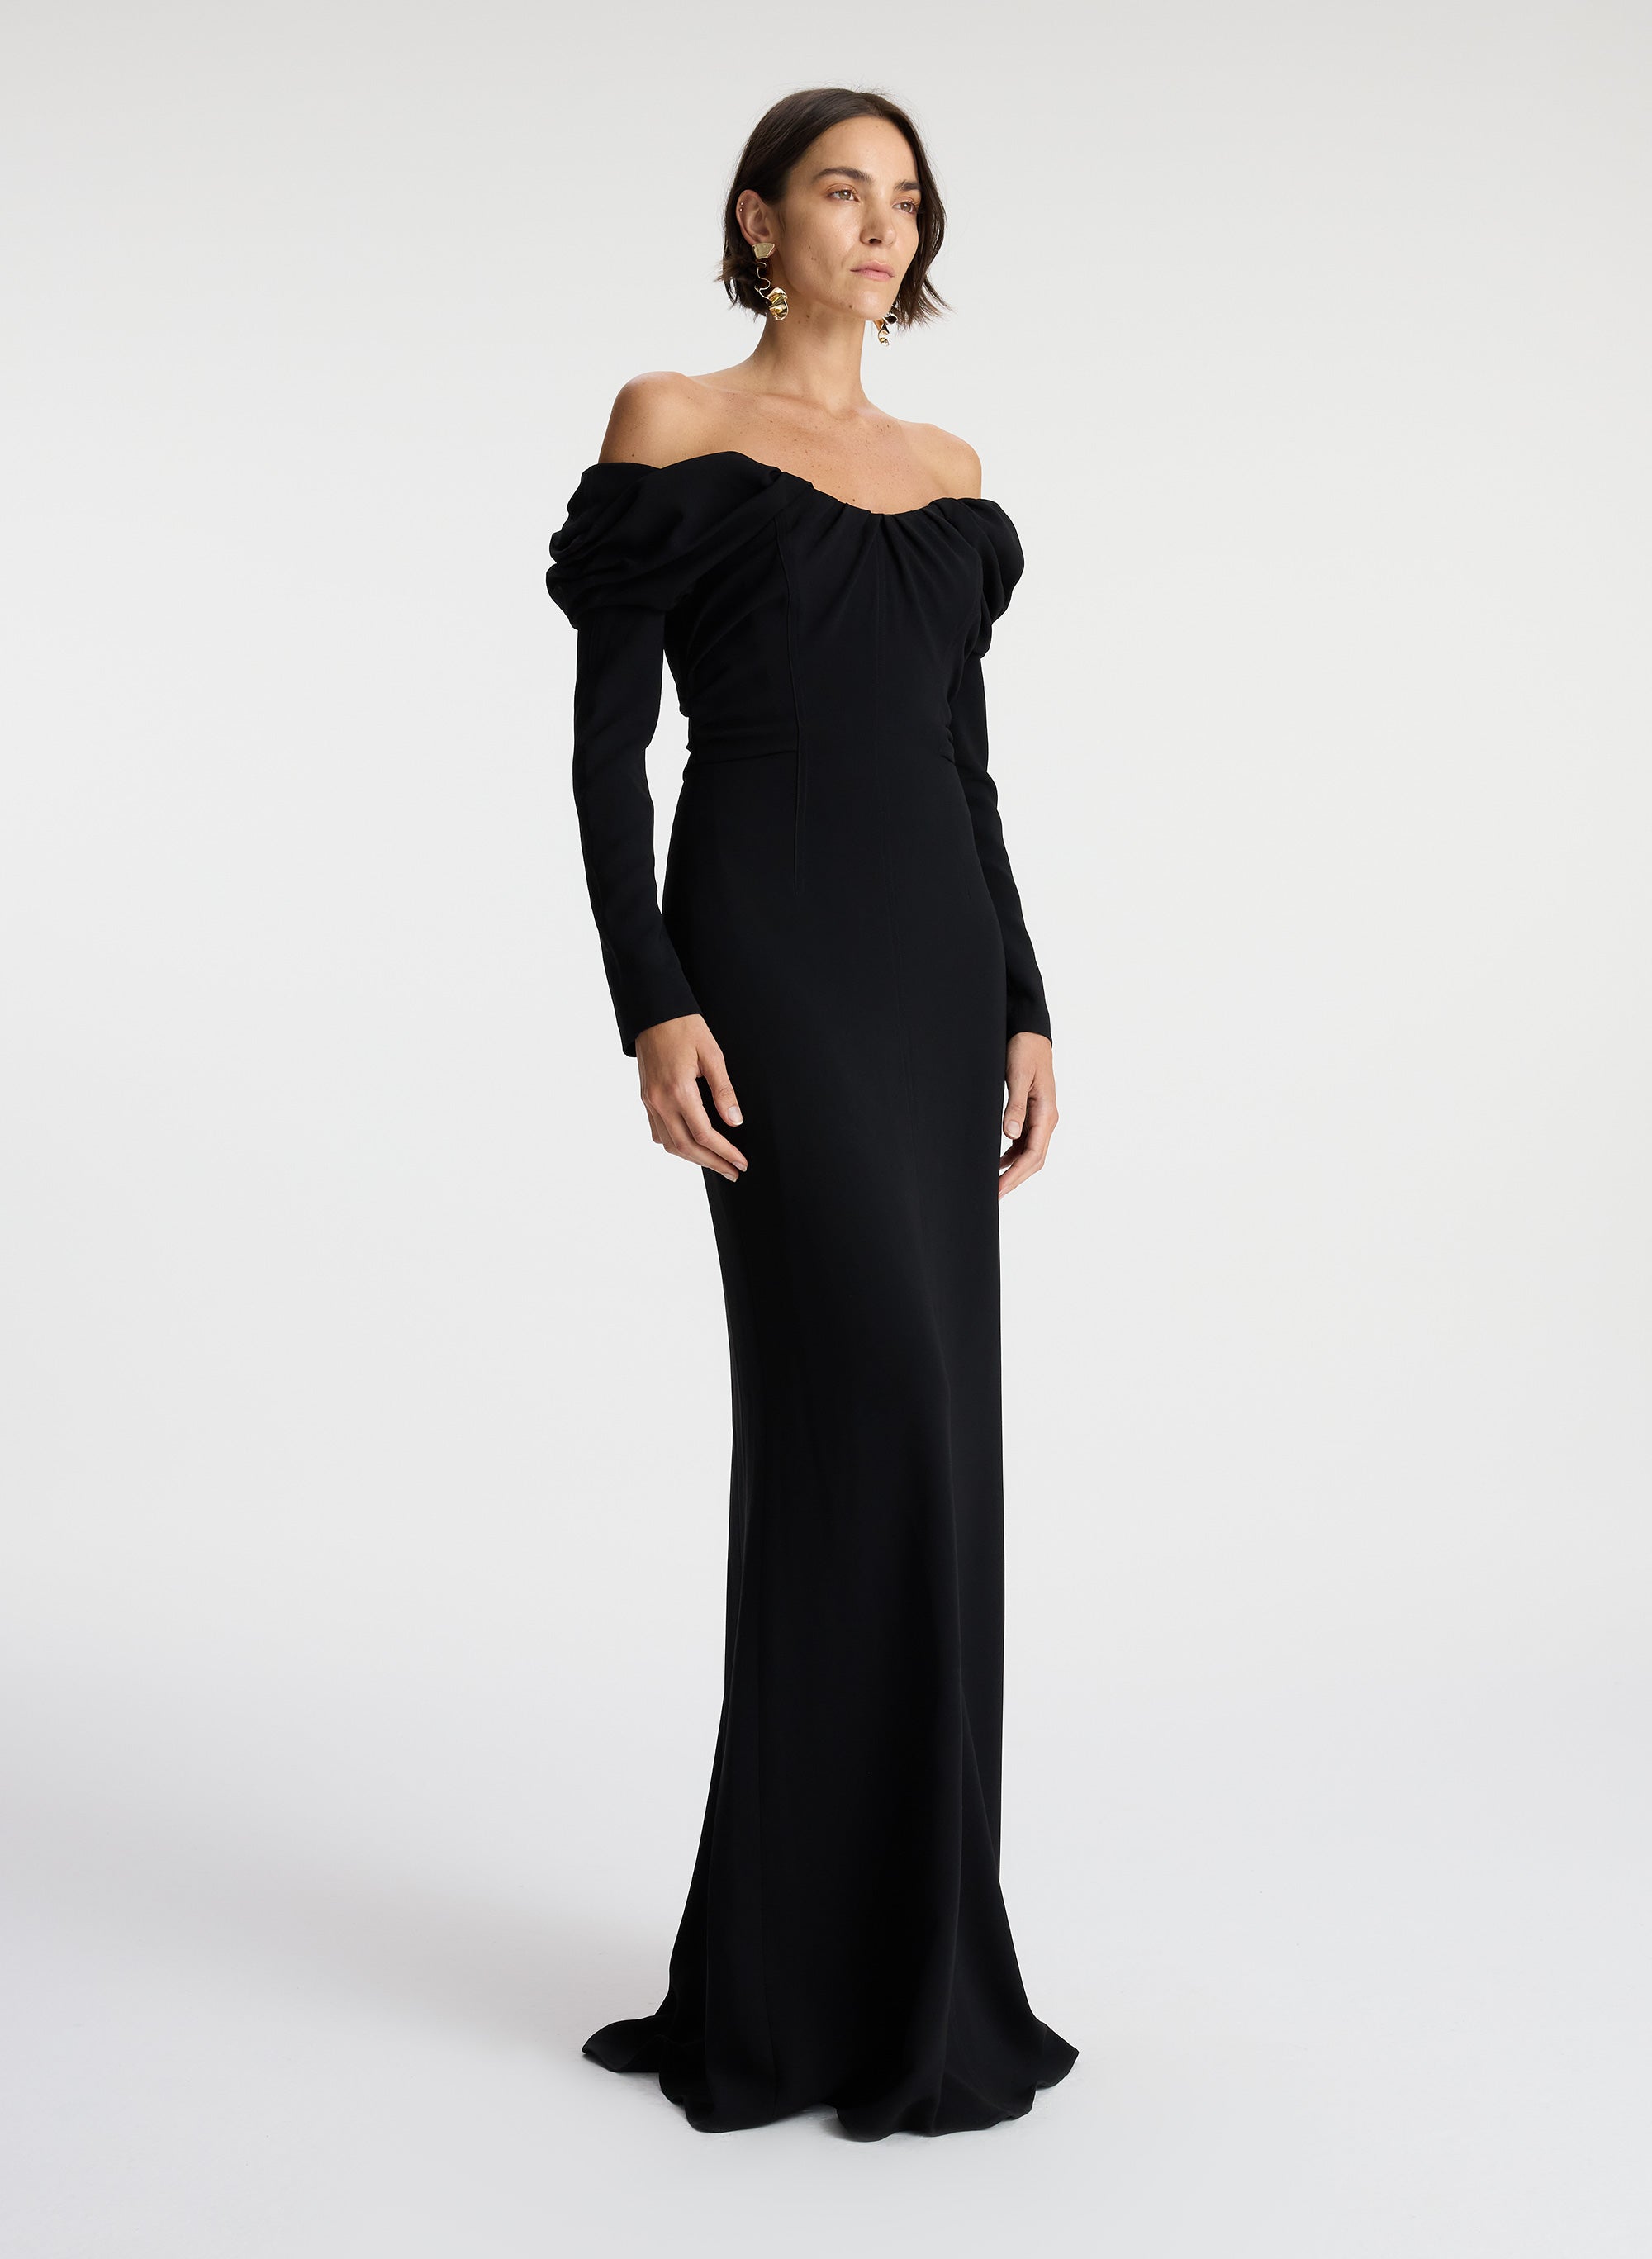 Grab Classy Off the Shoulder Dresses Now! - The Dress Outlet